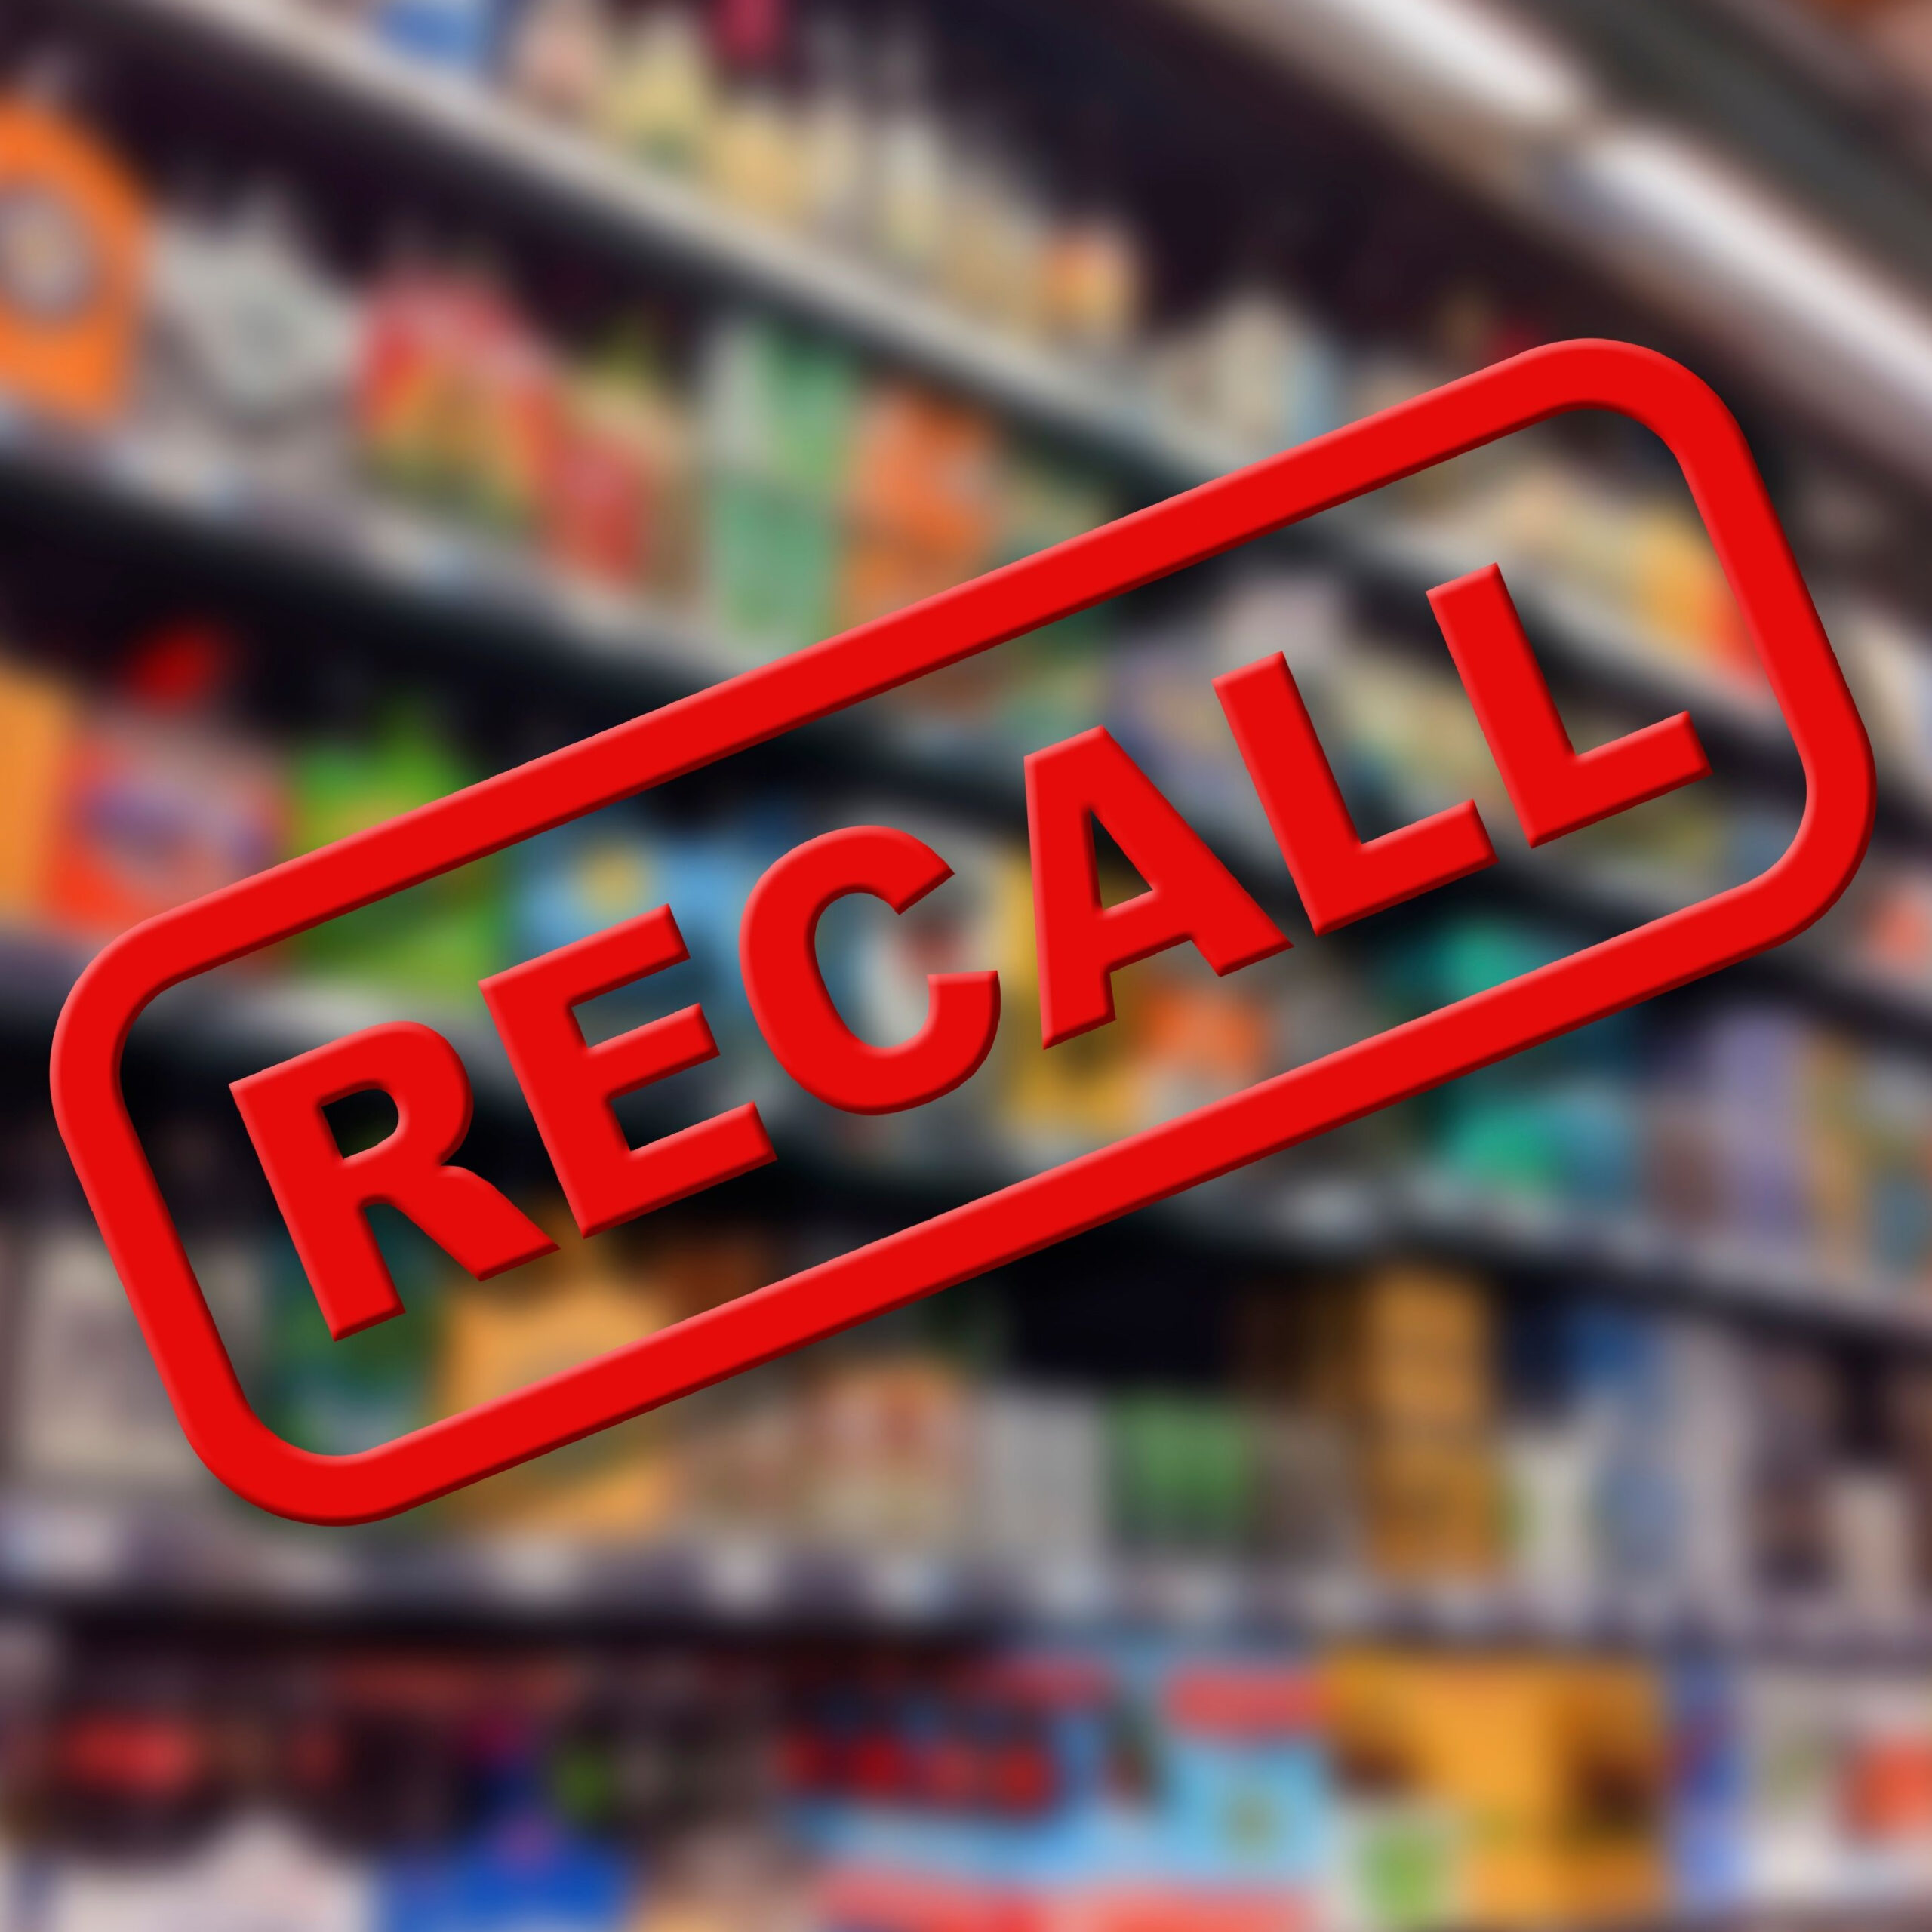 Martinelli's apple juice recalled over potential glass chips in the product